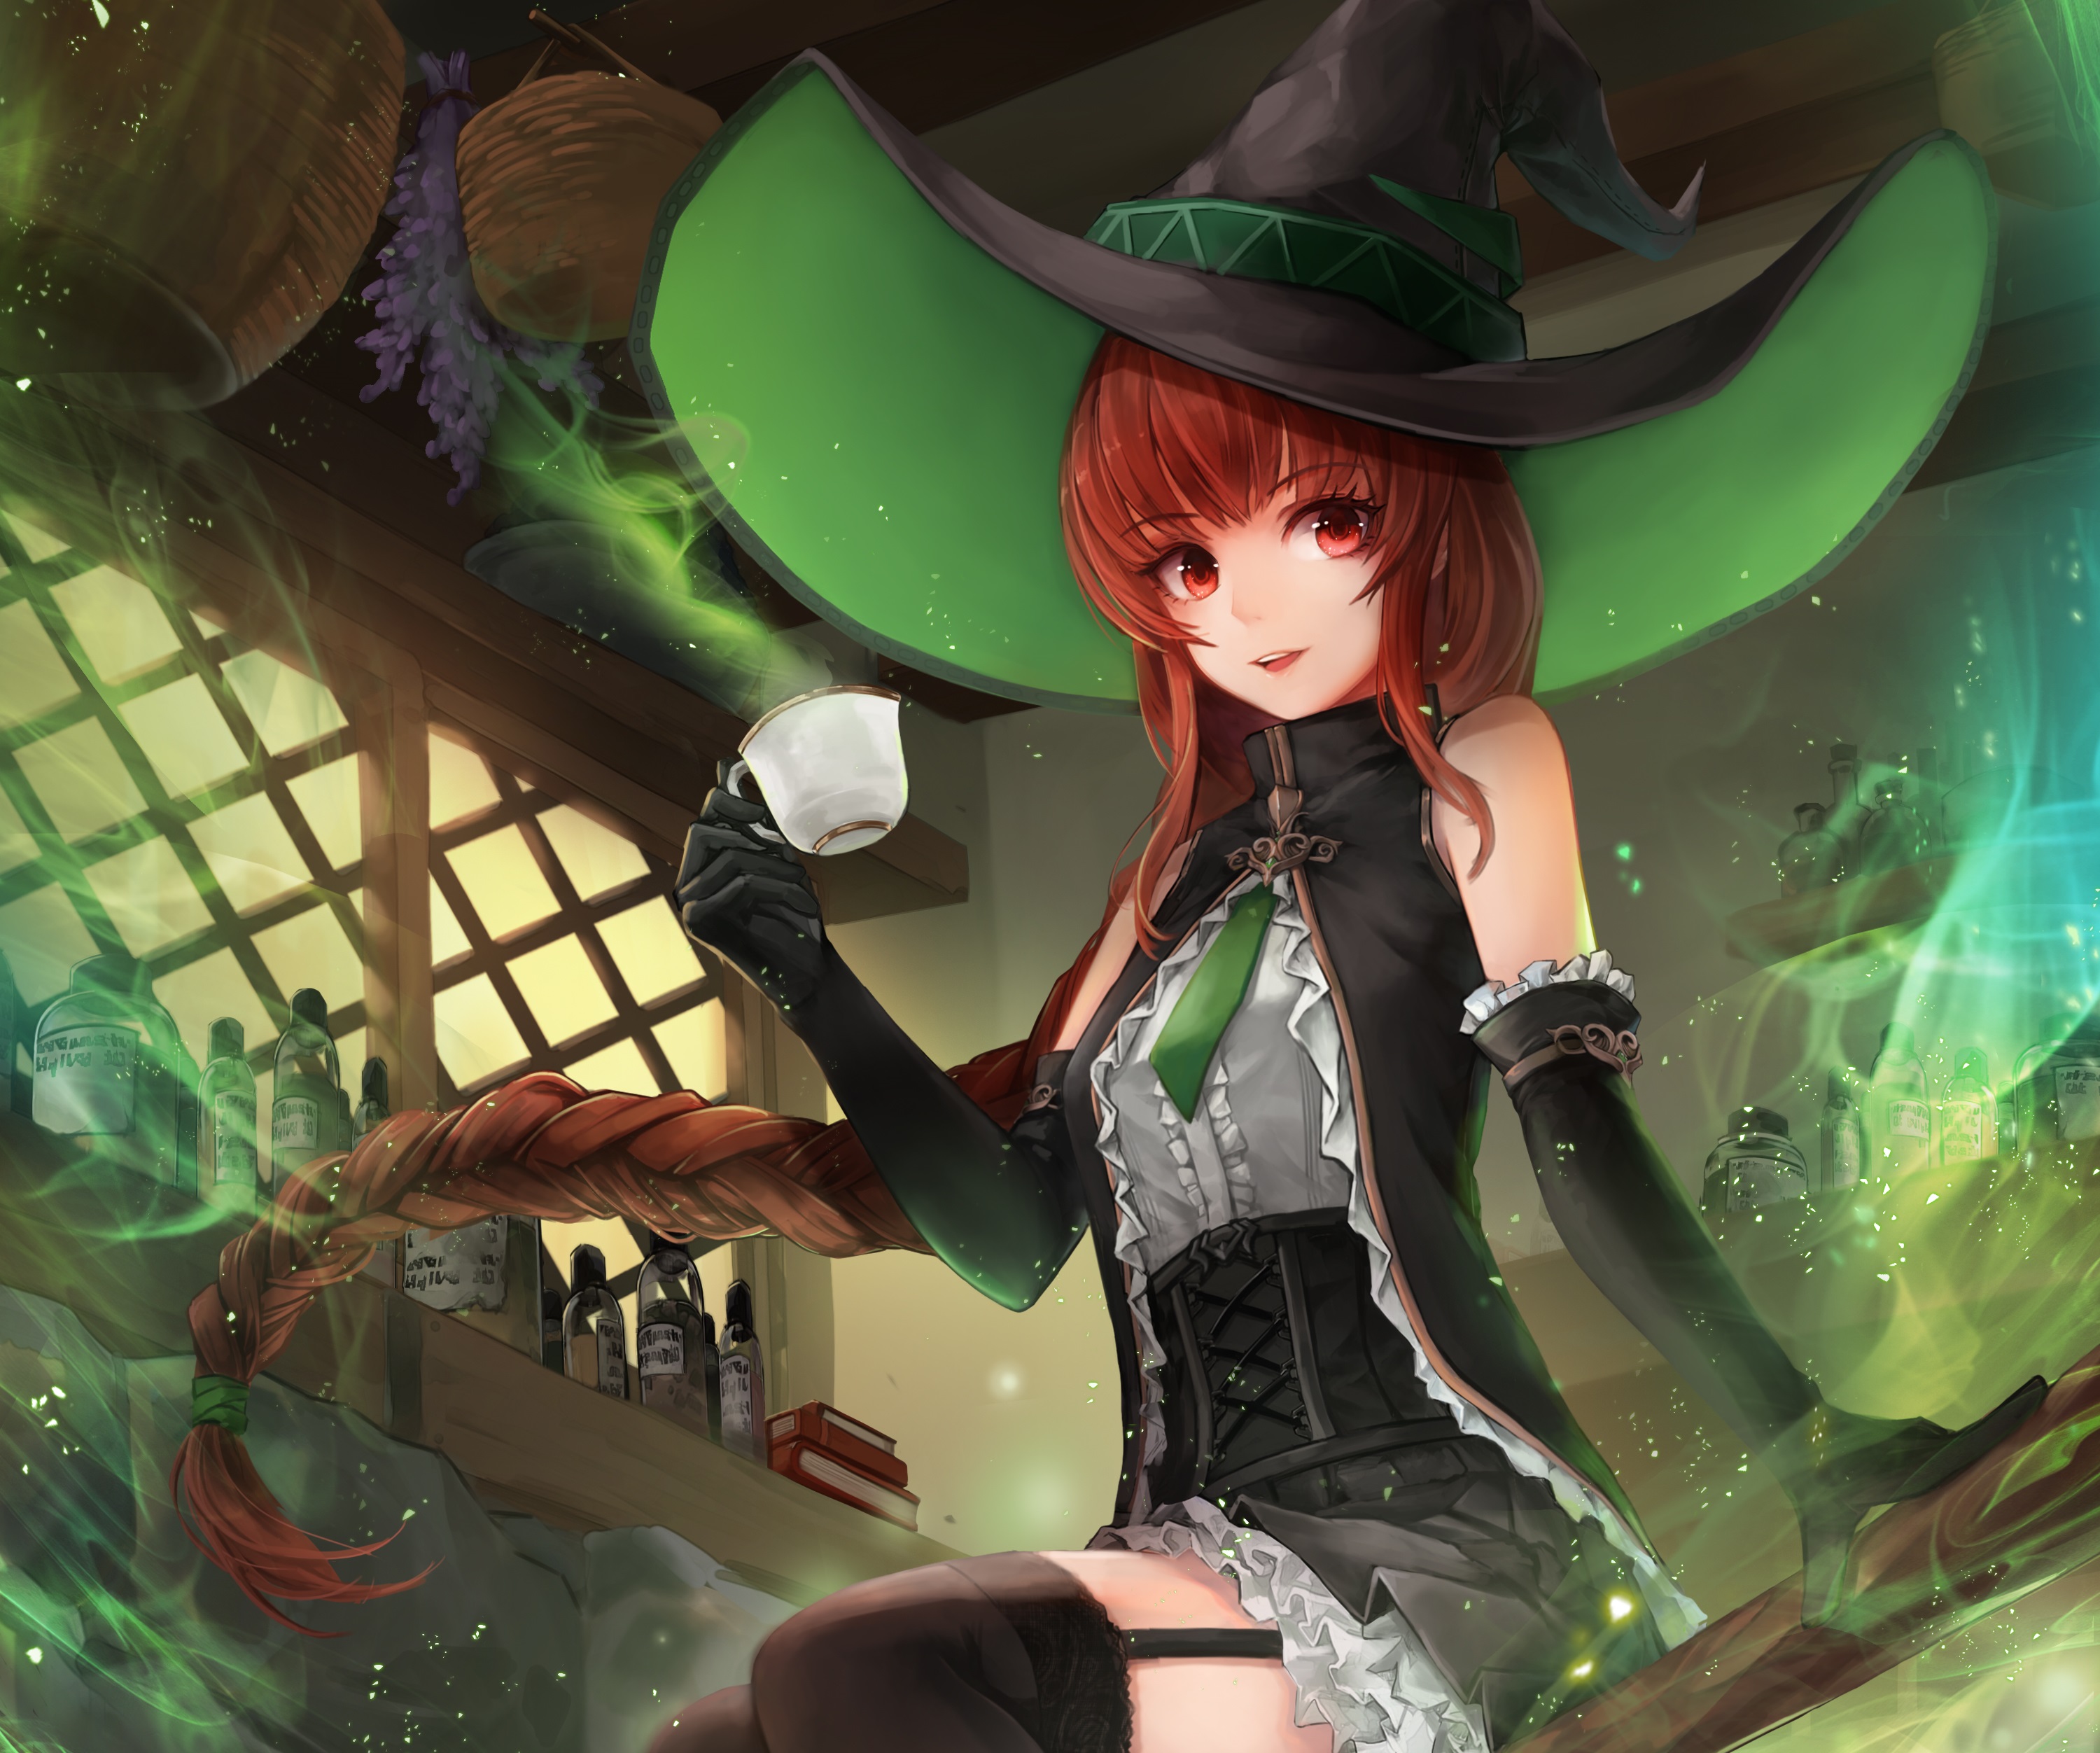 Hat Witch Teacup Long Hair Red Hair Red Eyes Tie Smile Glove 3000x2504